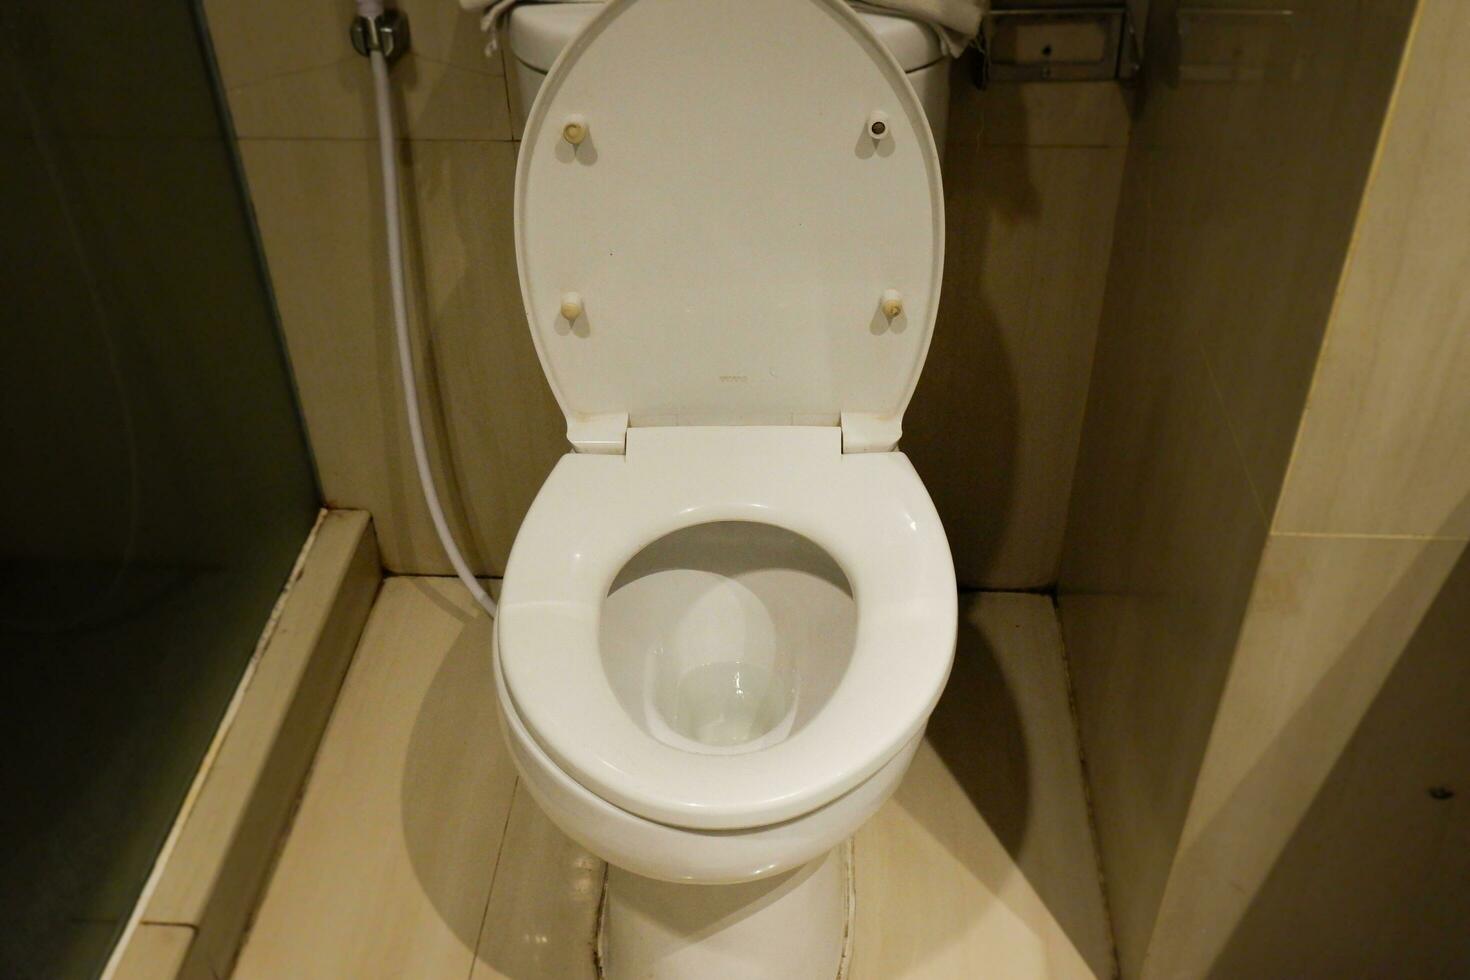 a sitting toilet in the bathroom that is often used for defecation photo